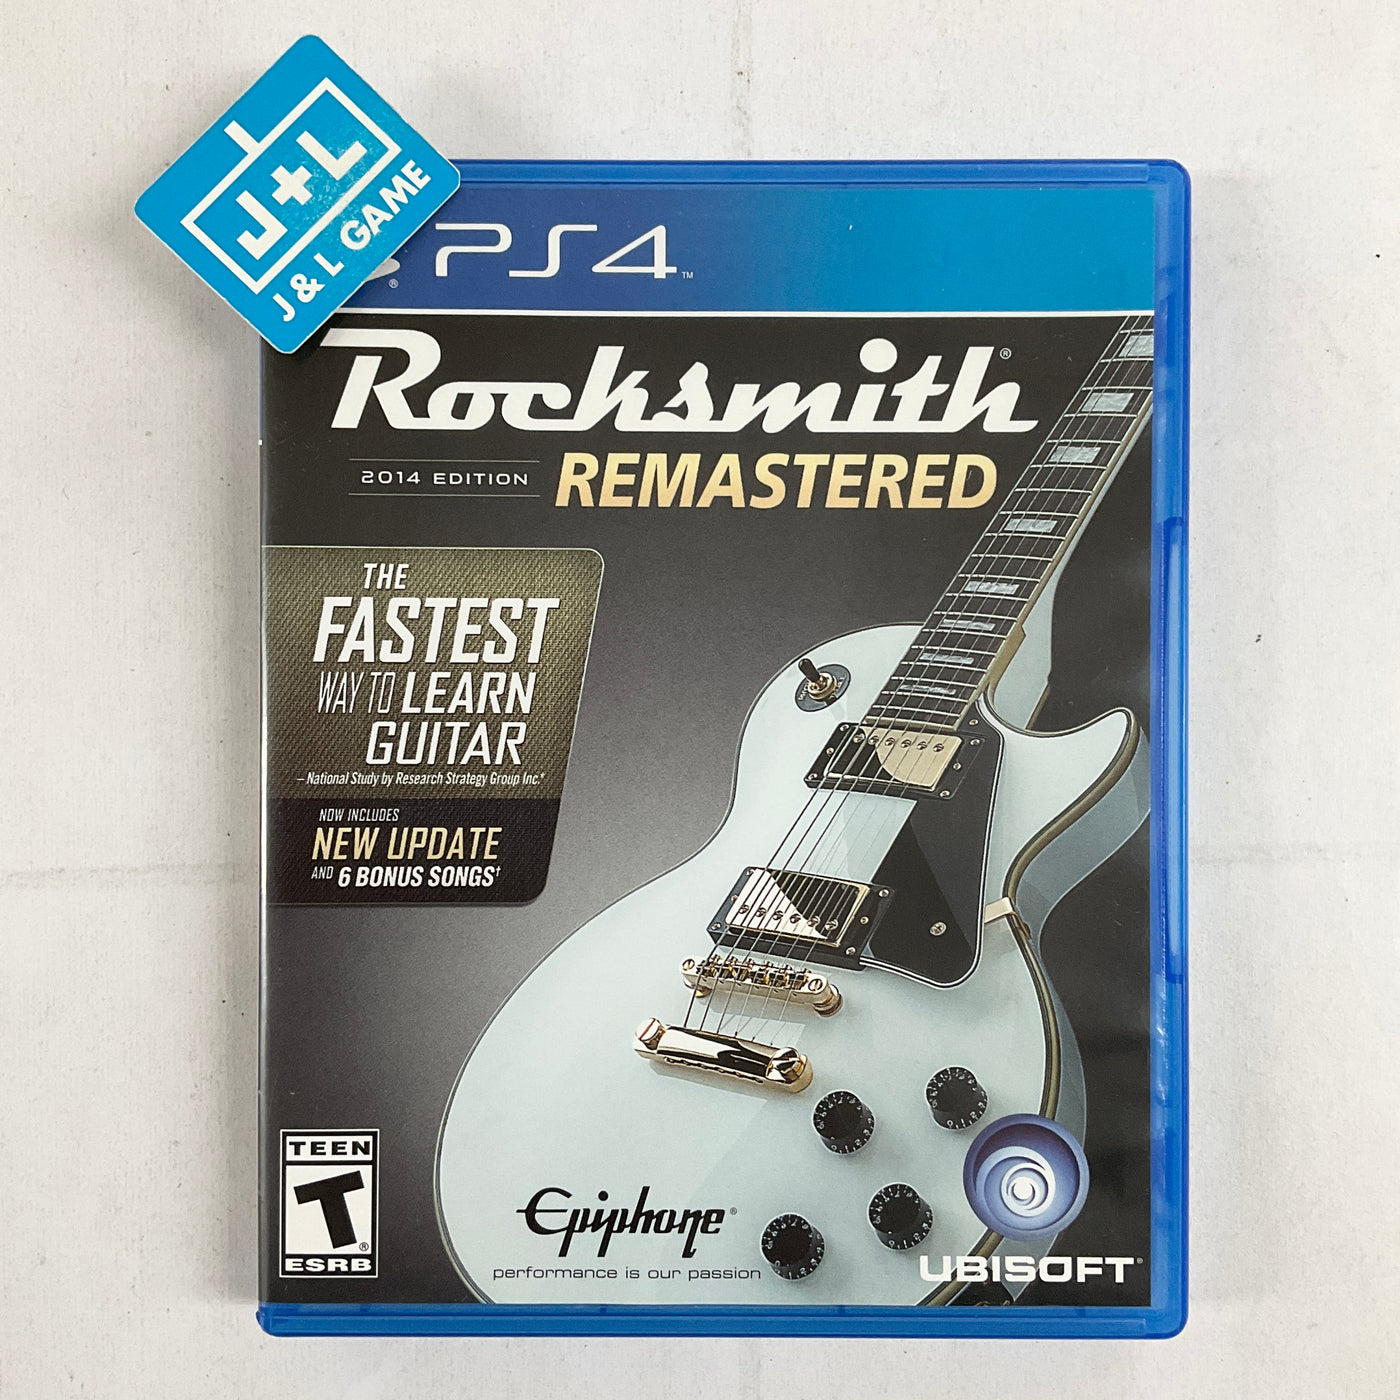 Rocksmith - Learn Guitar & Bass (Cable sold separately)